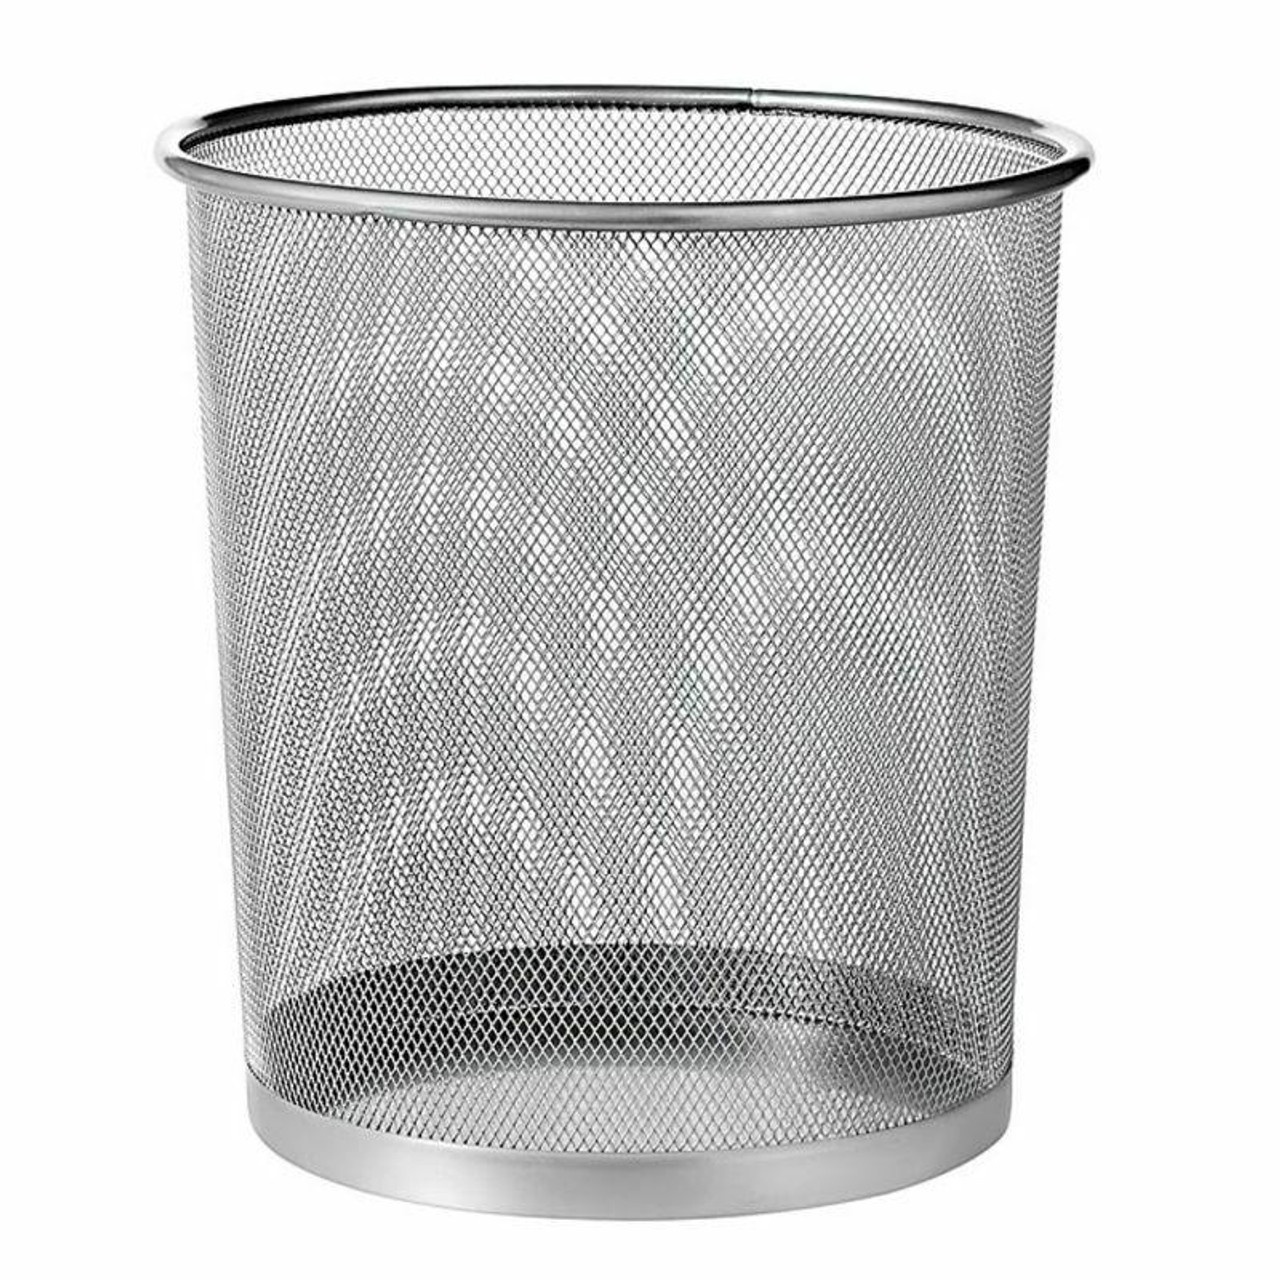 Woven mesh - huge stocks of stainless steel - low prices!